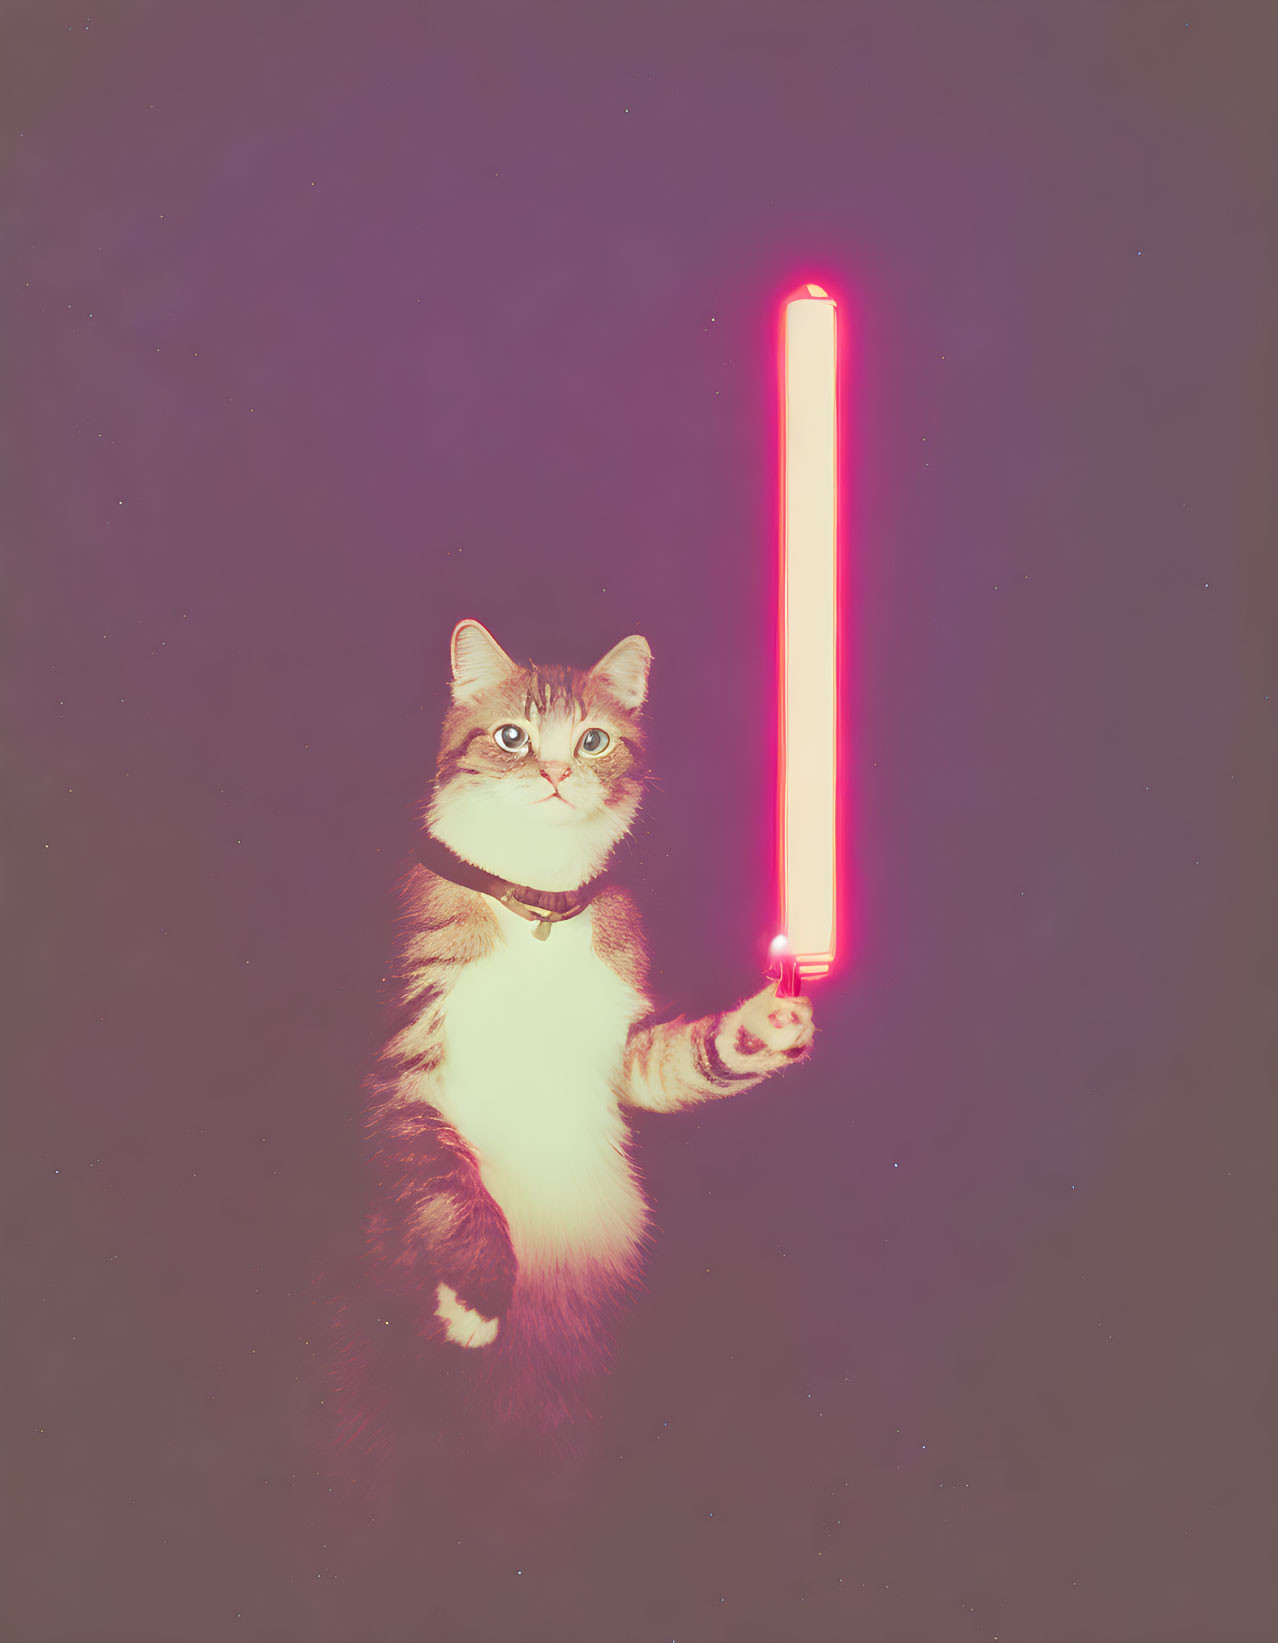 Cat with glowing red lightsaber standing on hind legs